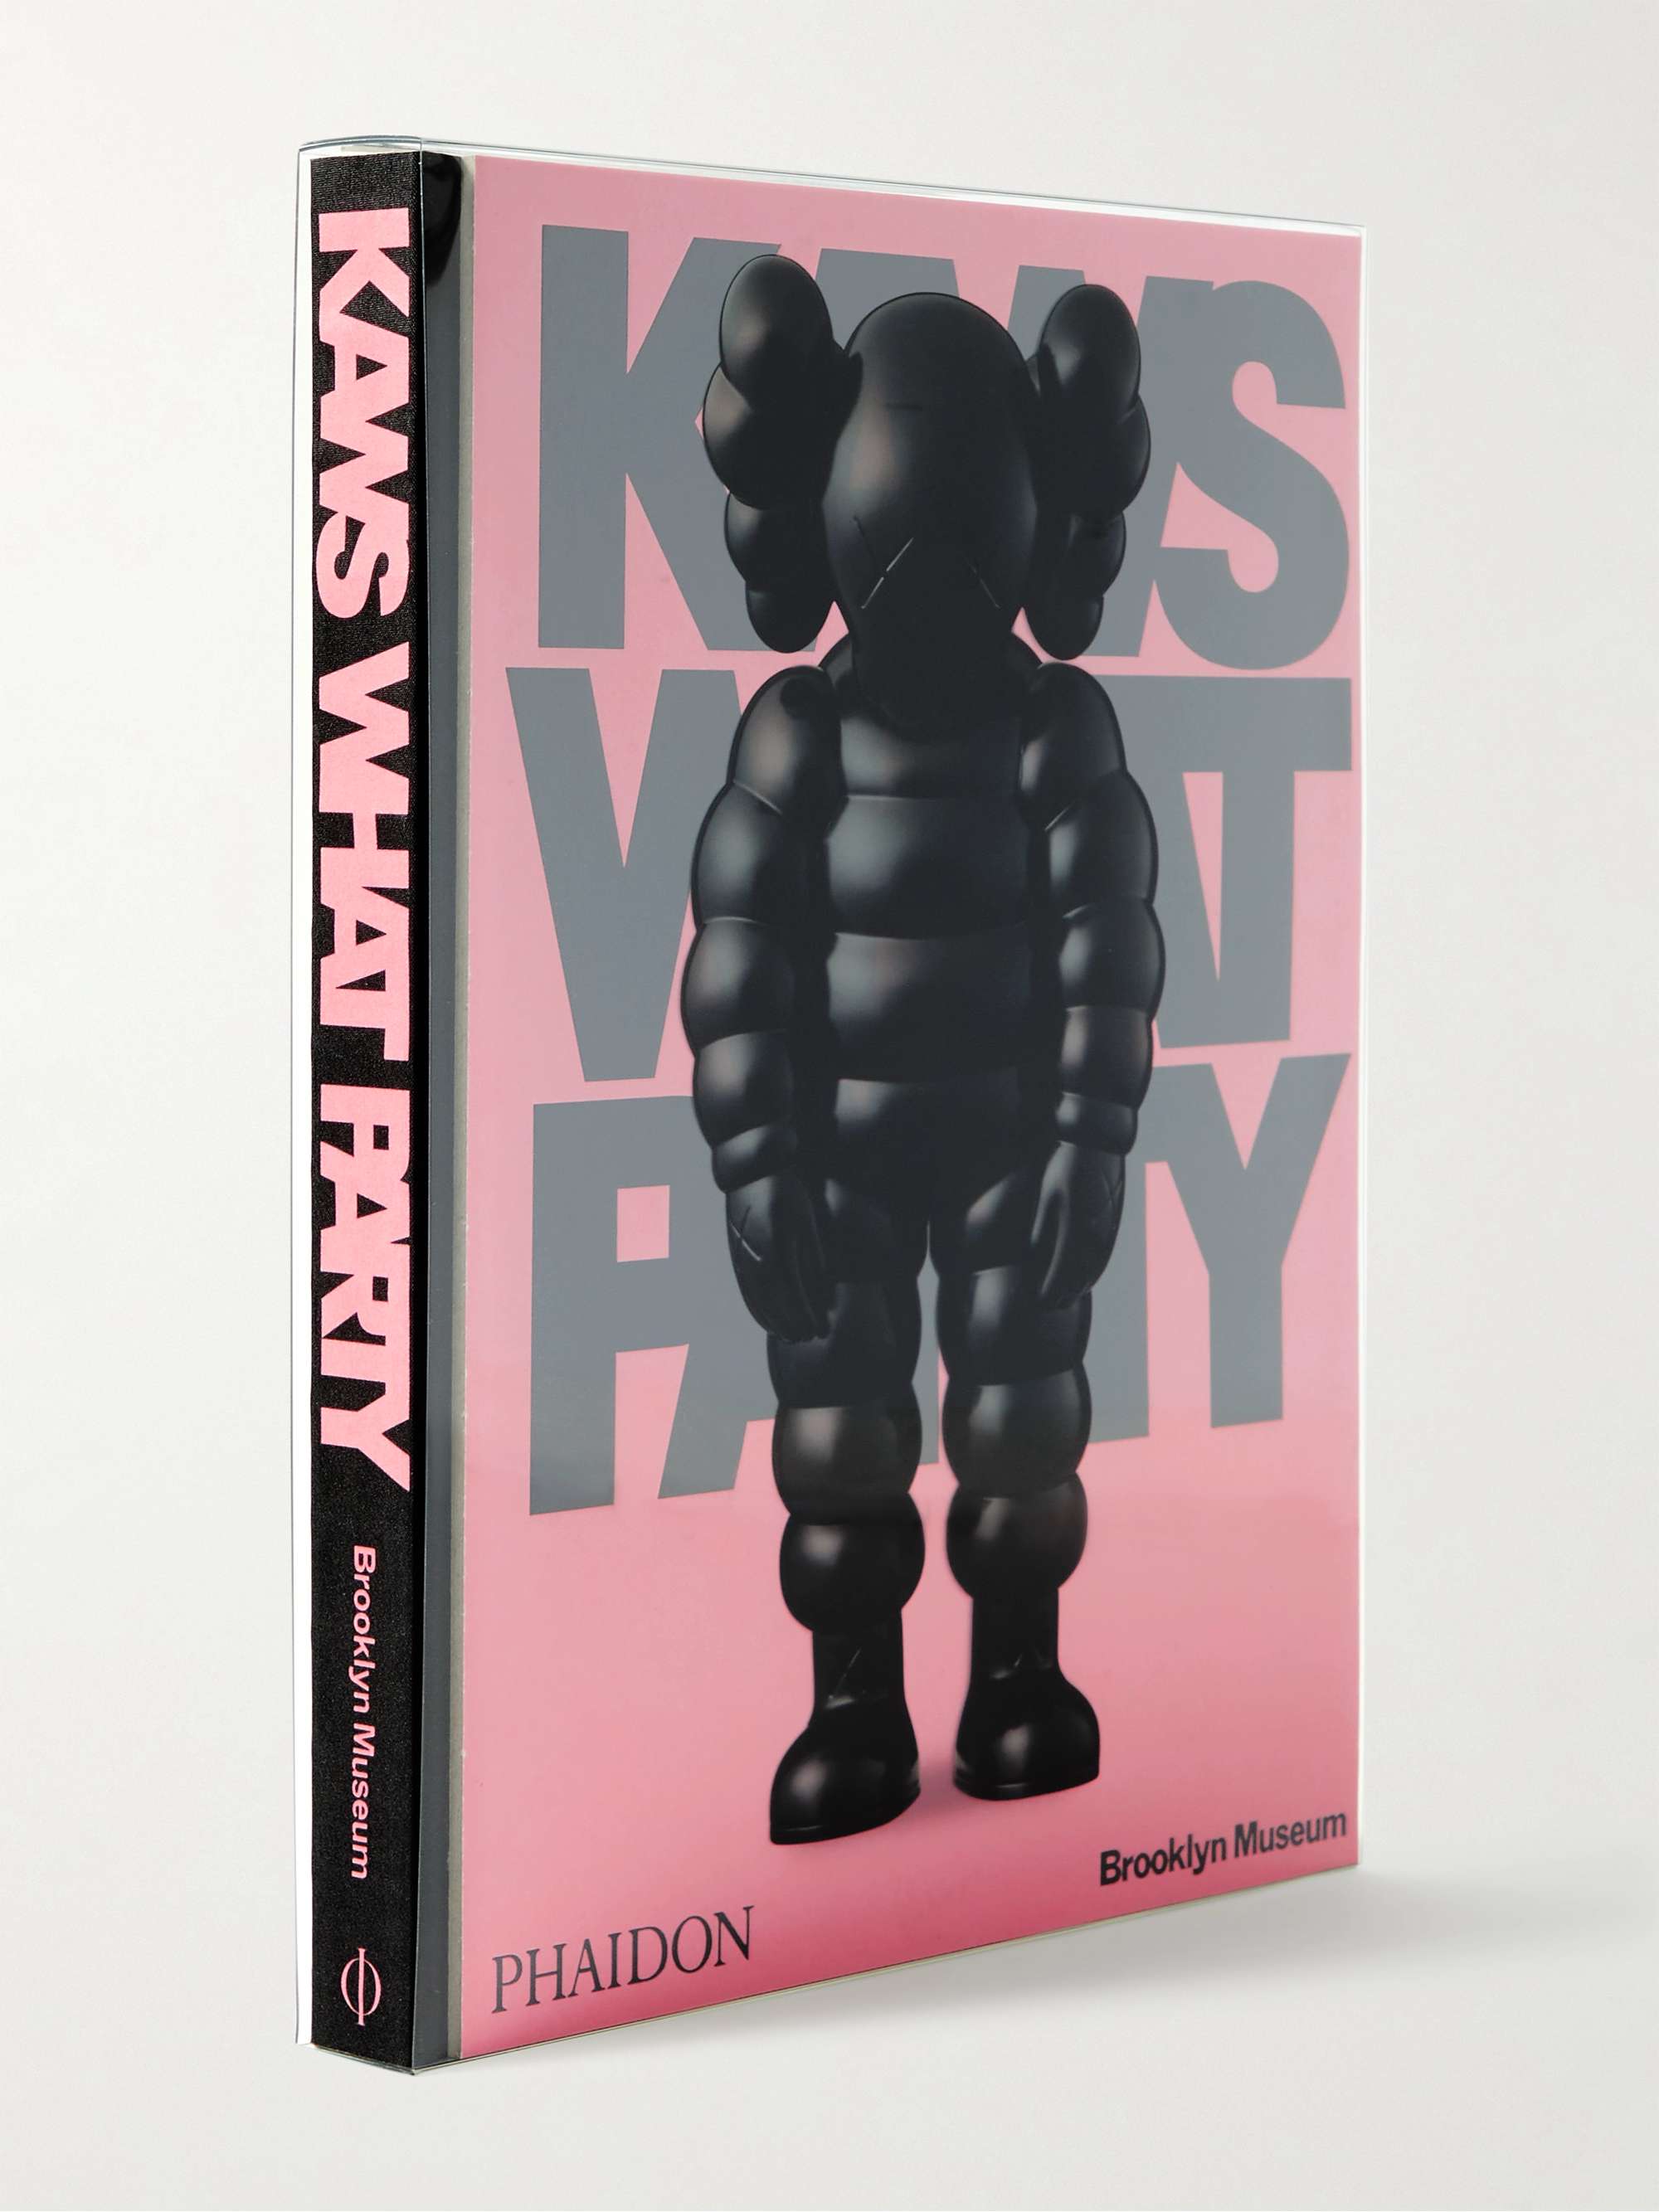 PHAIDON KAWS: What Party Hardcover Book - Black Edition